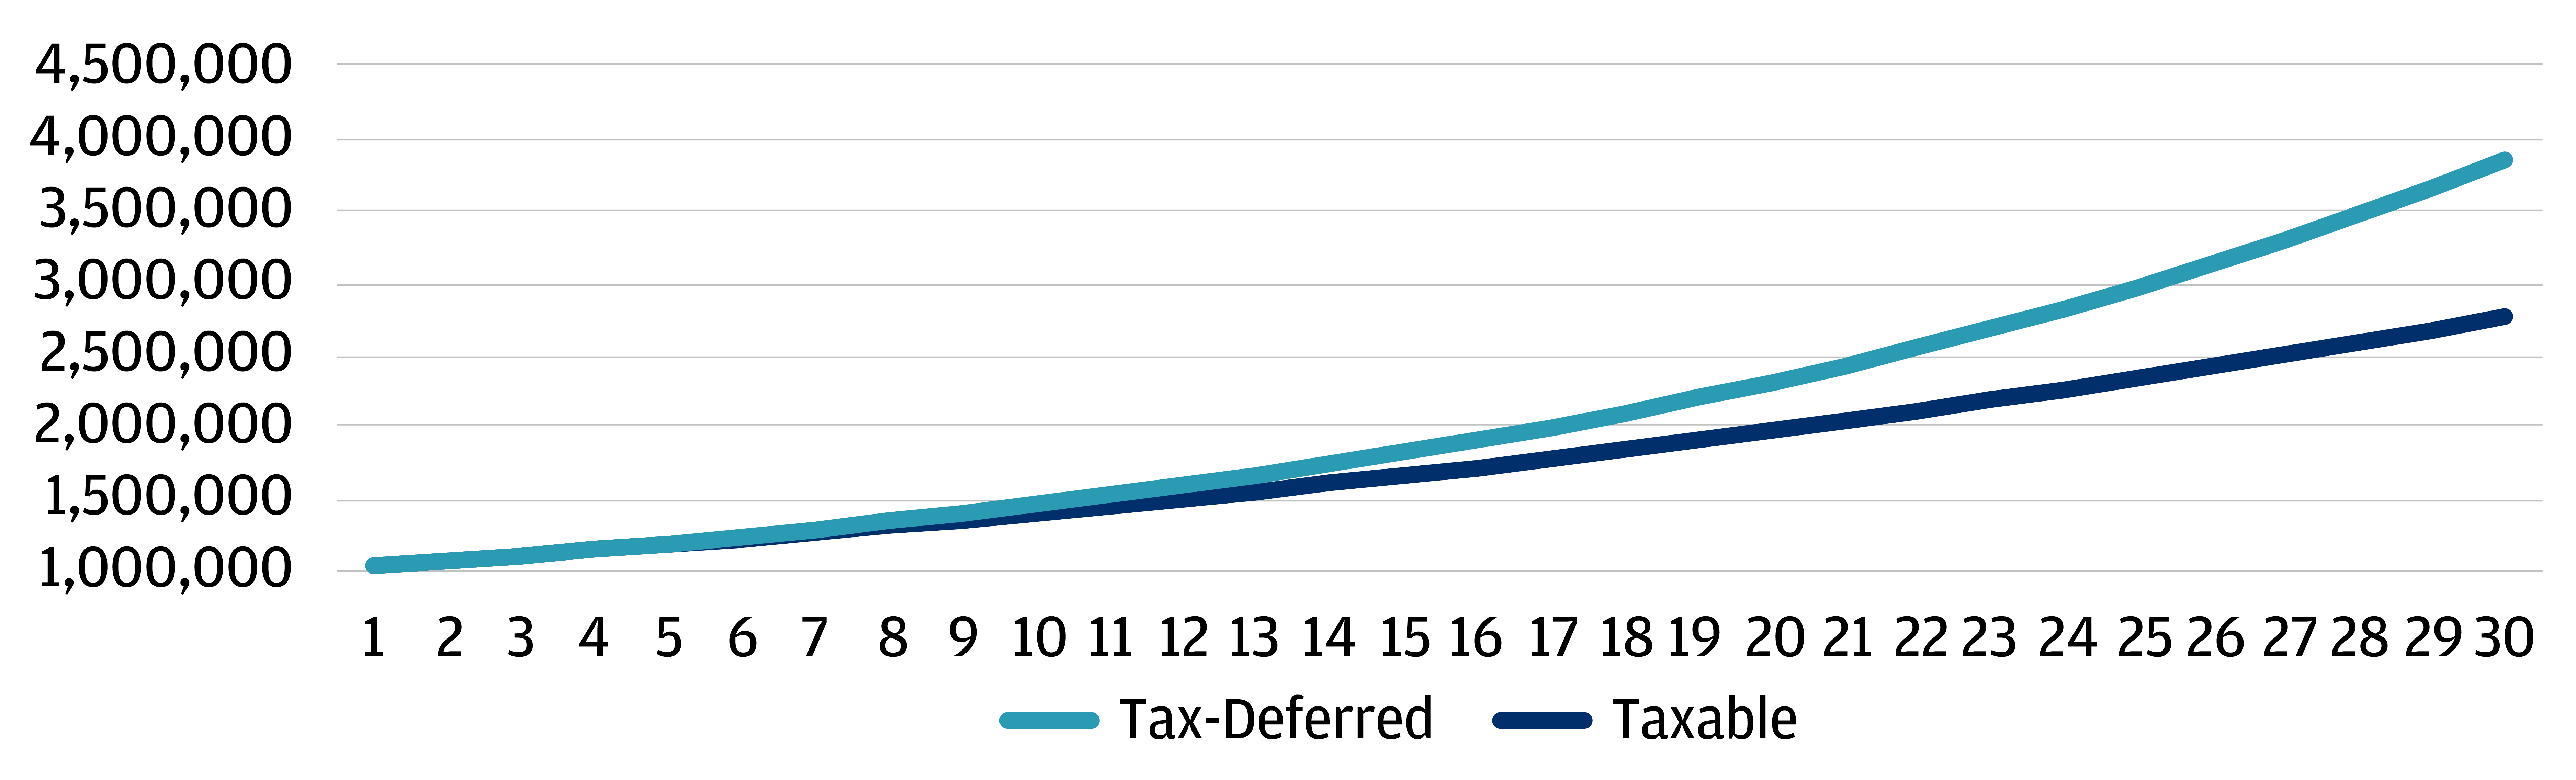 Analysis is for 30 years with an initial $1MM investment and assumes highest U.S. federal tax bracket. This chart projects the growth of high-yield bonds in a taxable and tax-deferred account on an after-tax basis. 